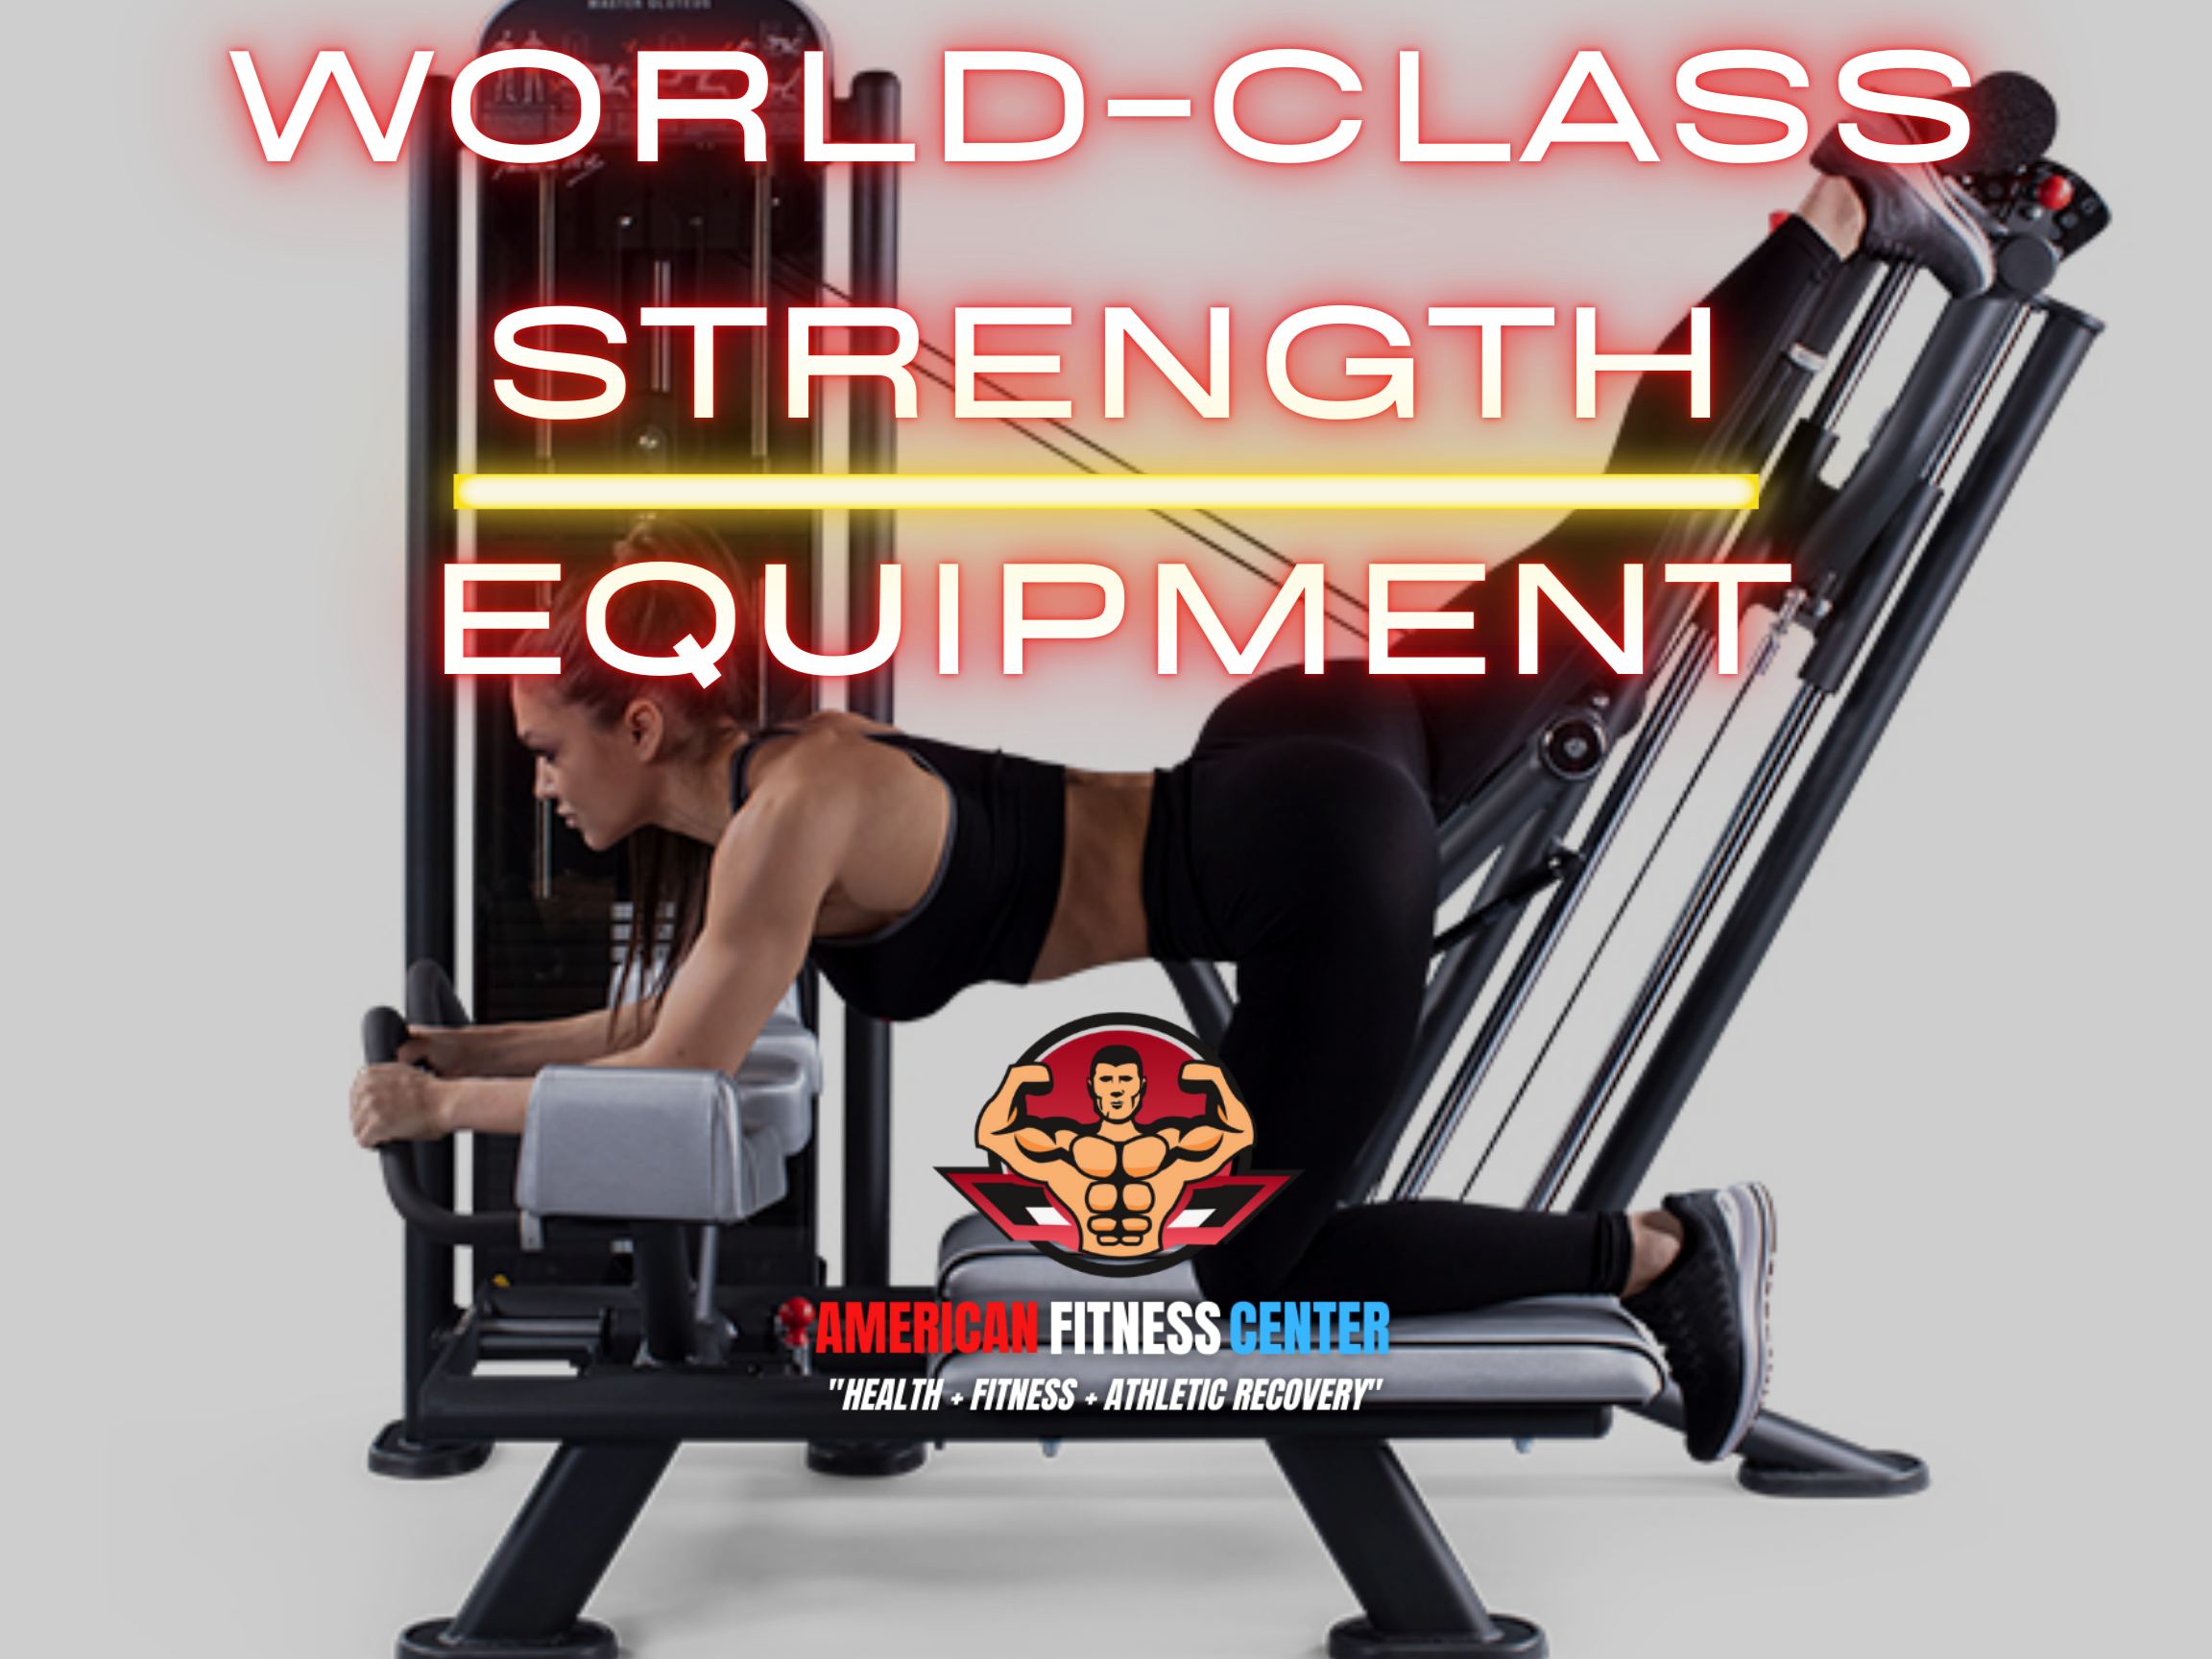 24-Hour-Gym-With-World-Class-Strength-Equipment-Near-Me-in-Roswell-GA-American-Fitness-Center-West-Roswell